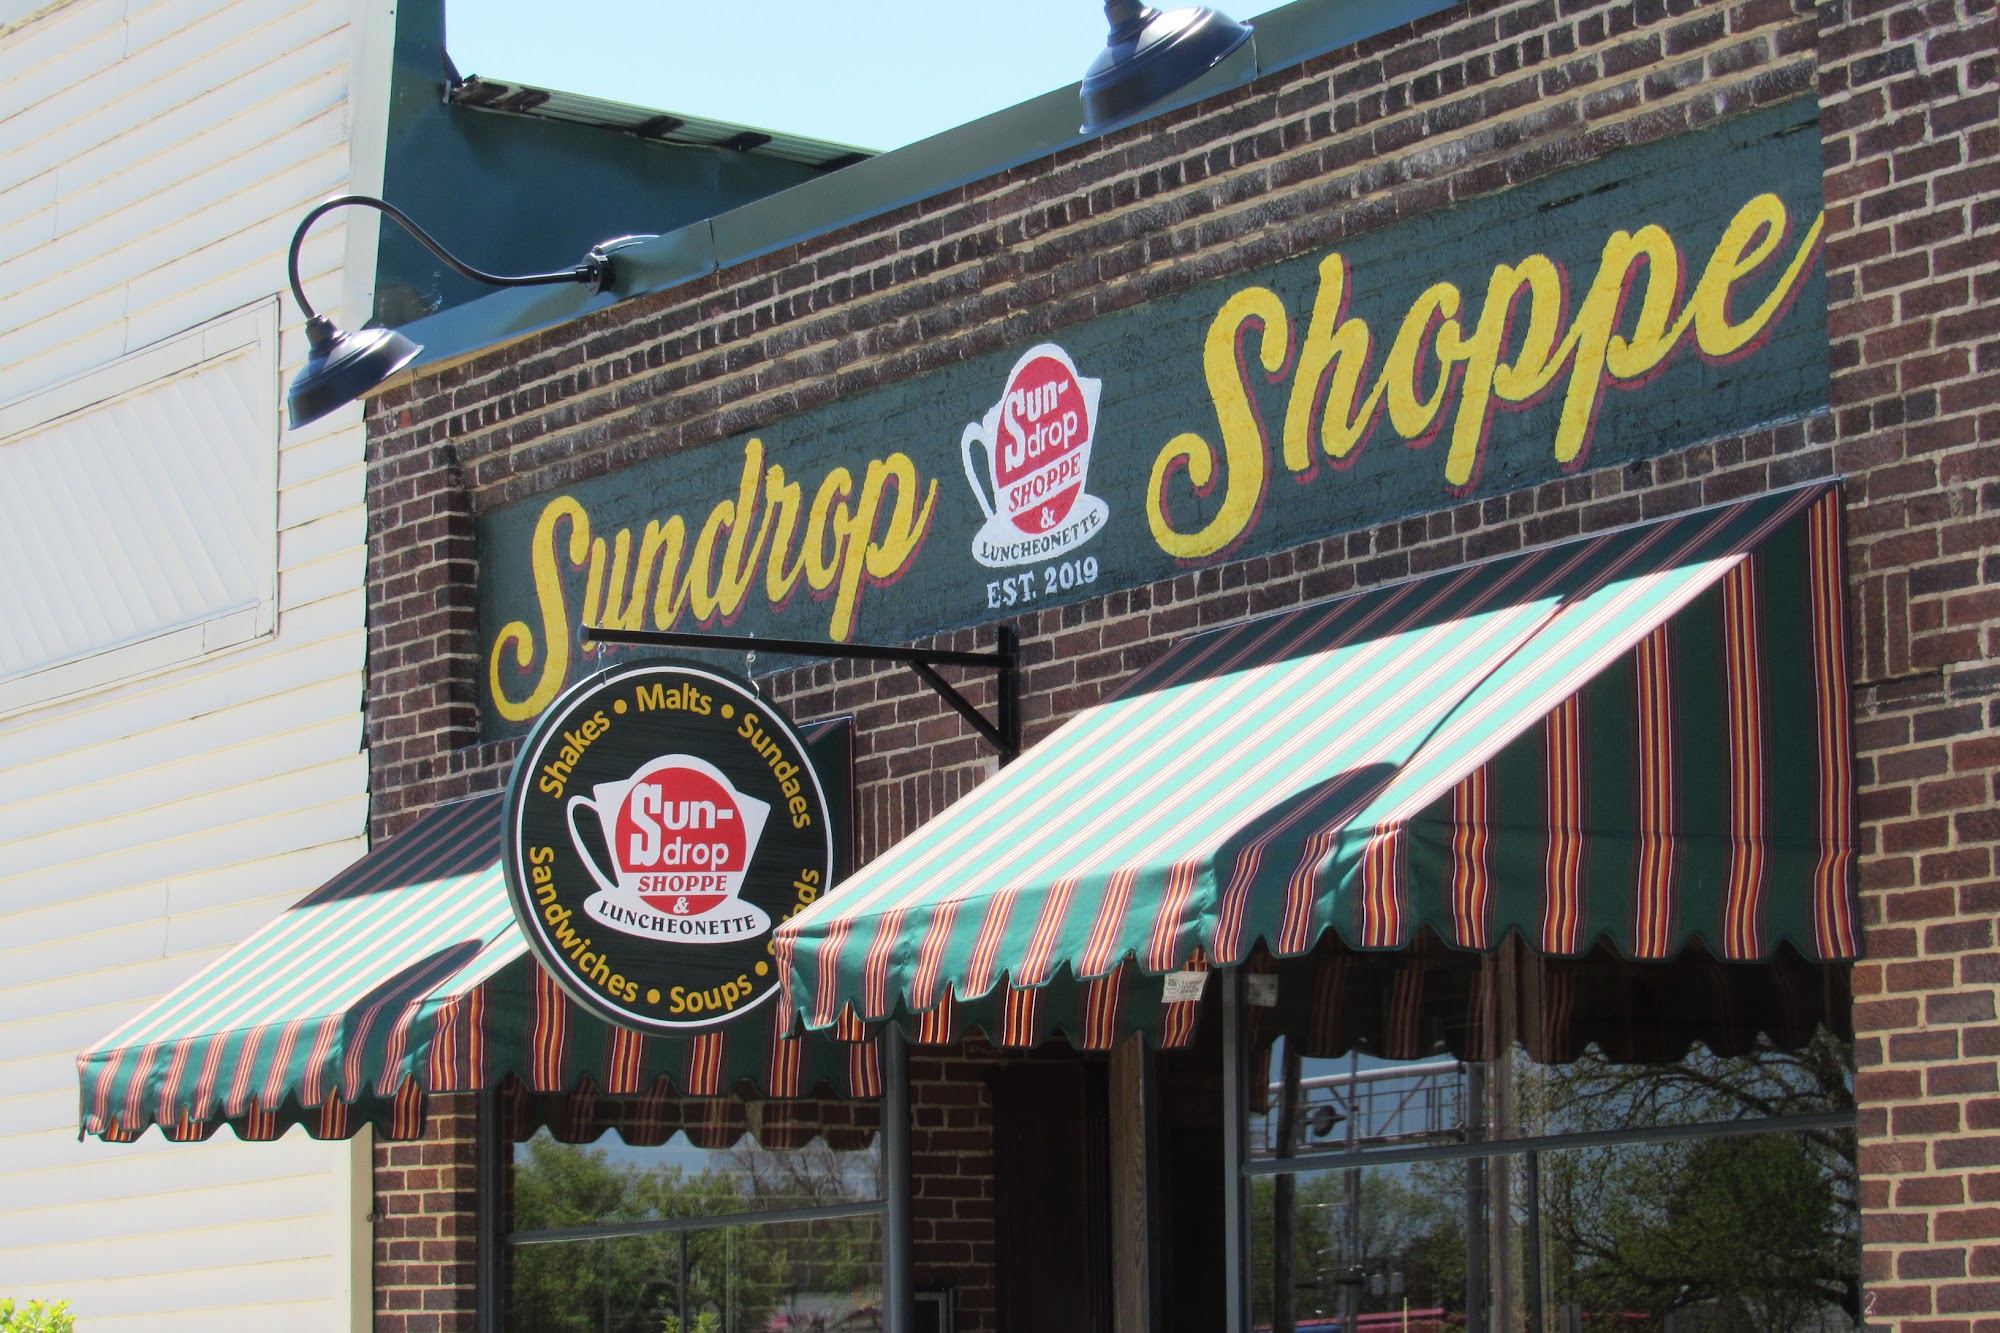 Sundrop Shoppe and Lunchonette